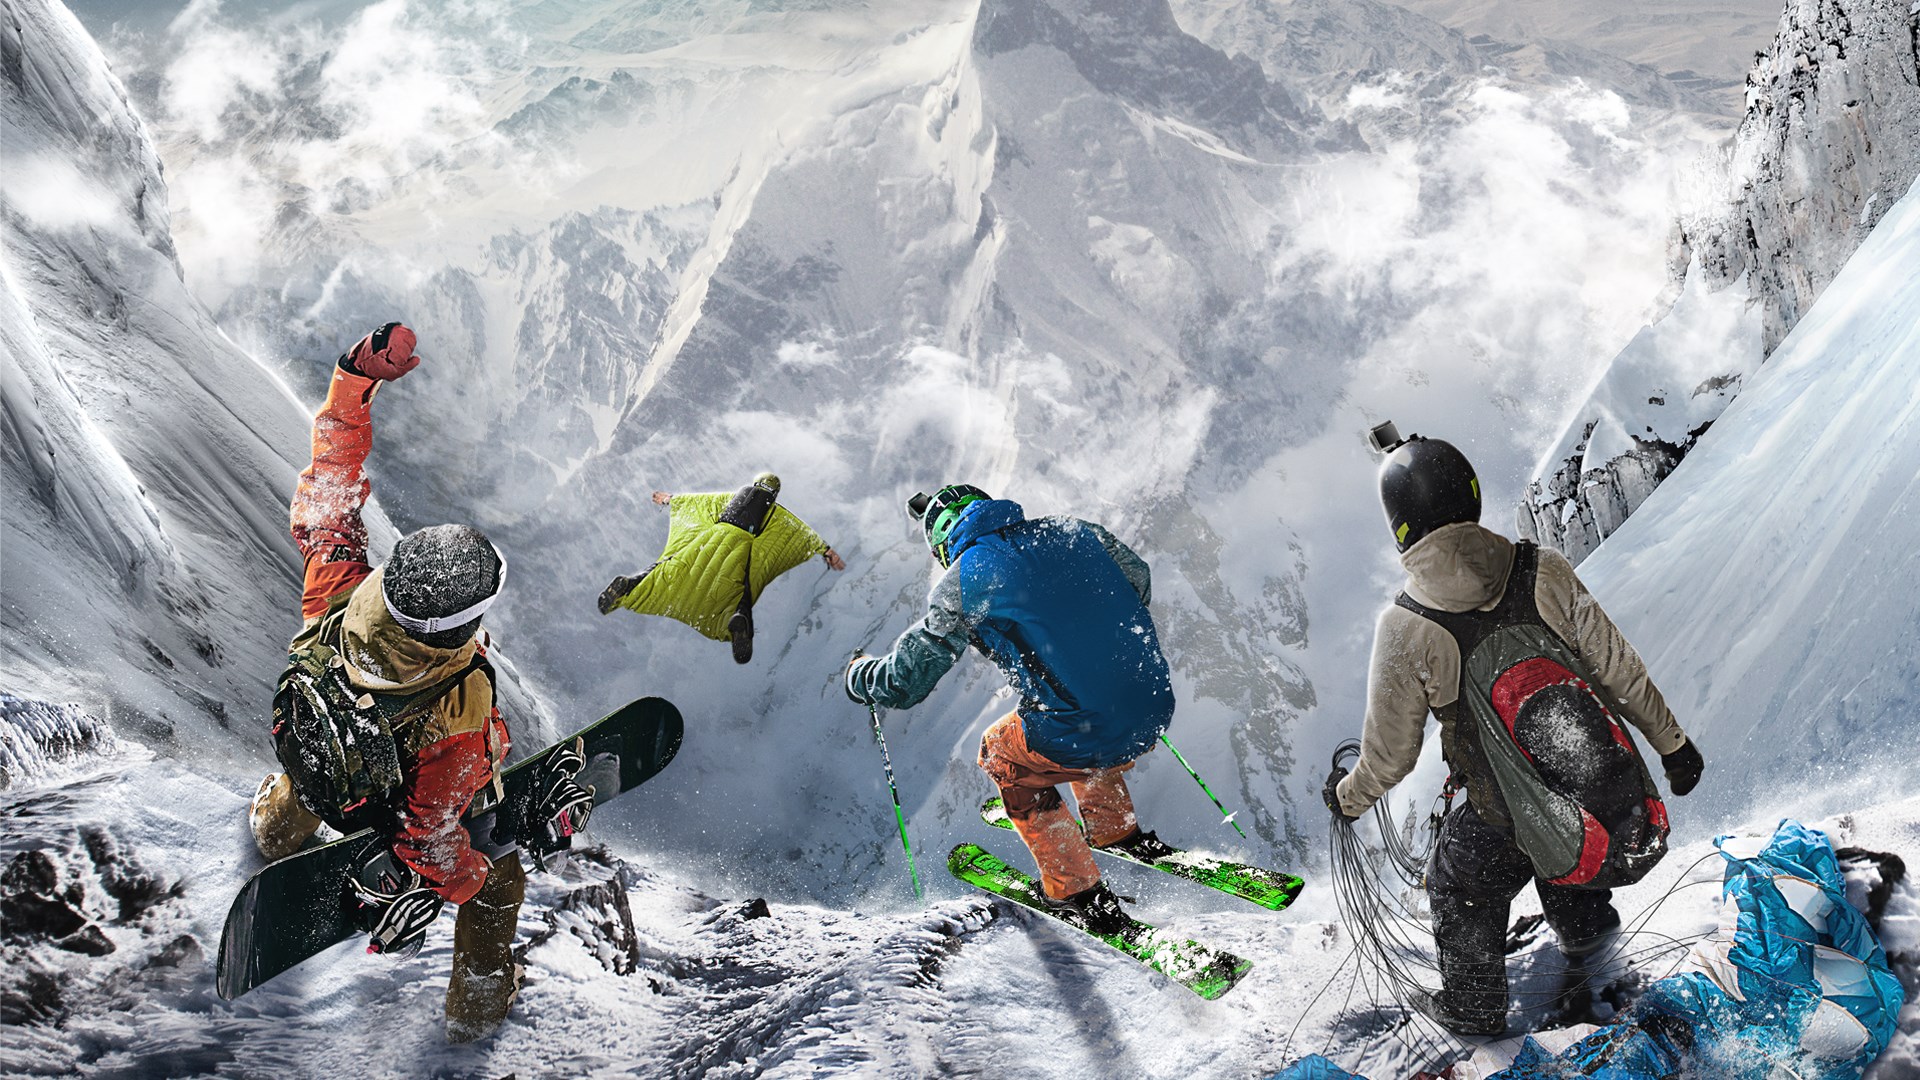 Steep X Games Gold Edition  Download and Buy Today - Epic Games Store